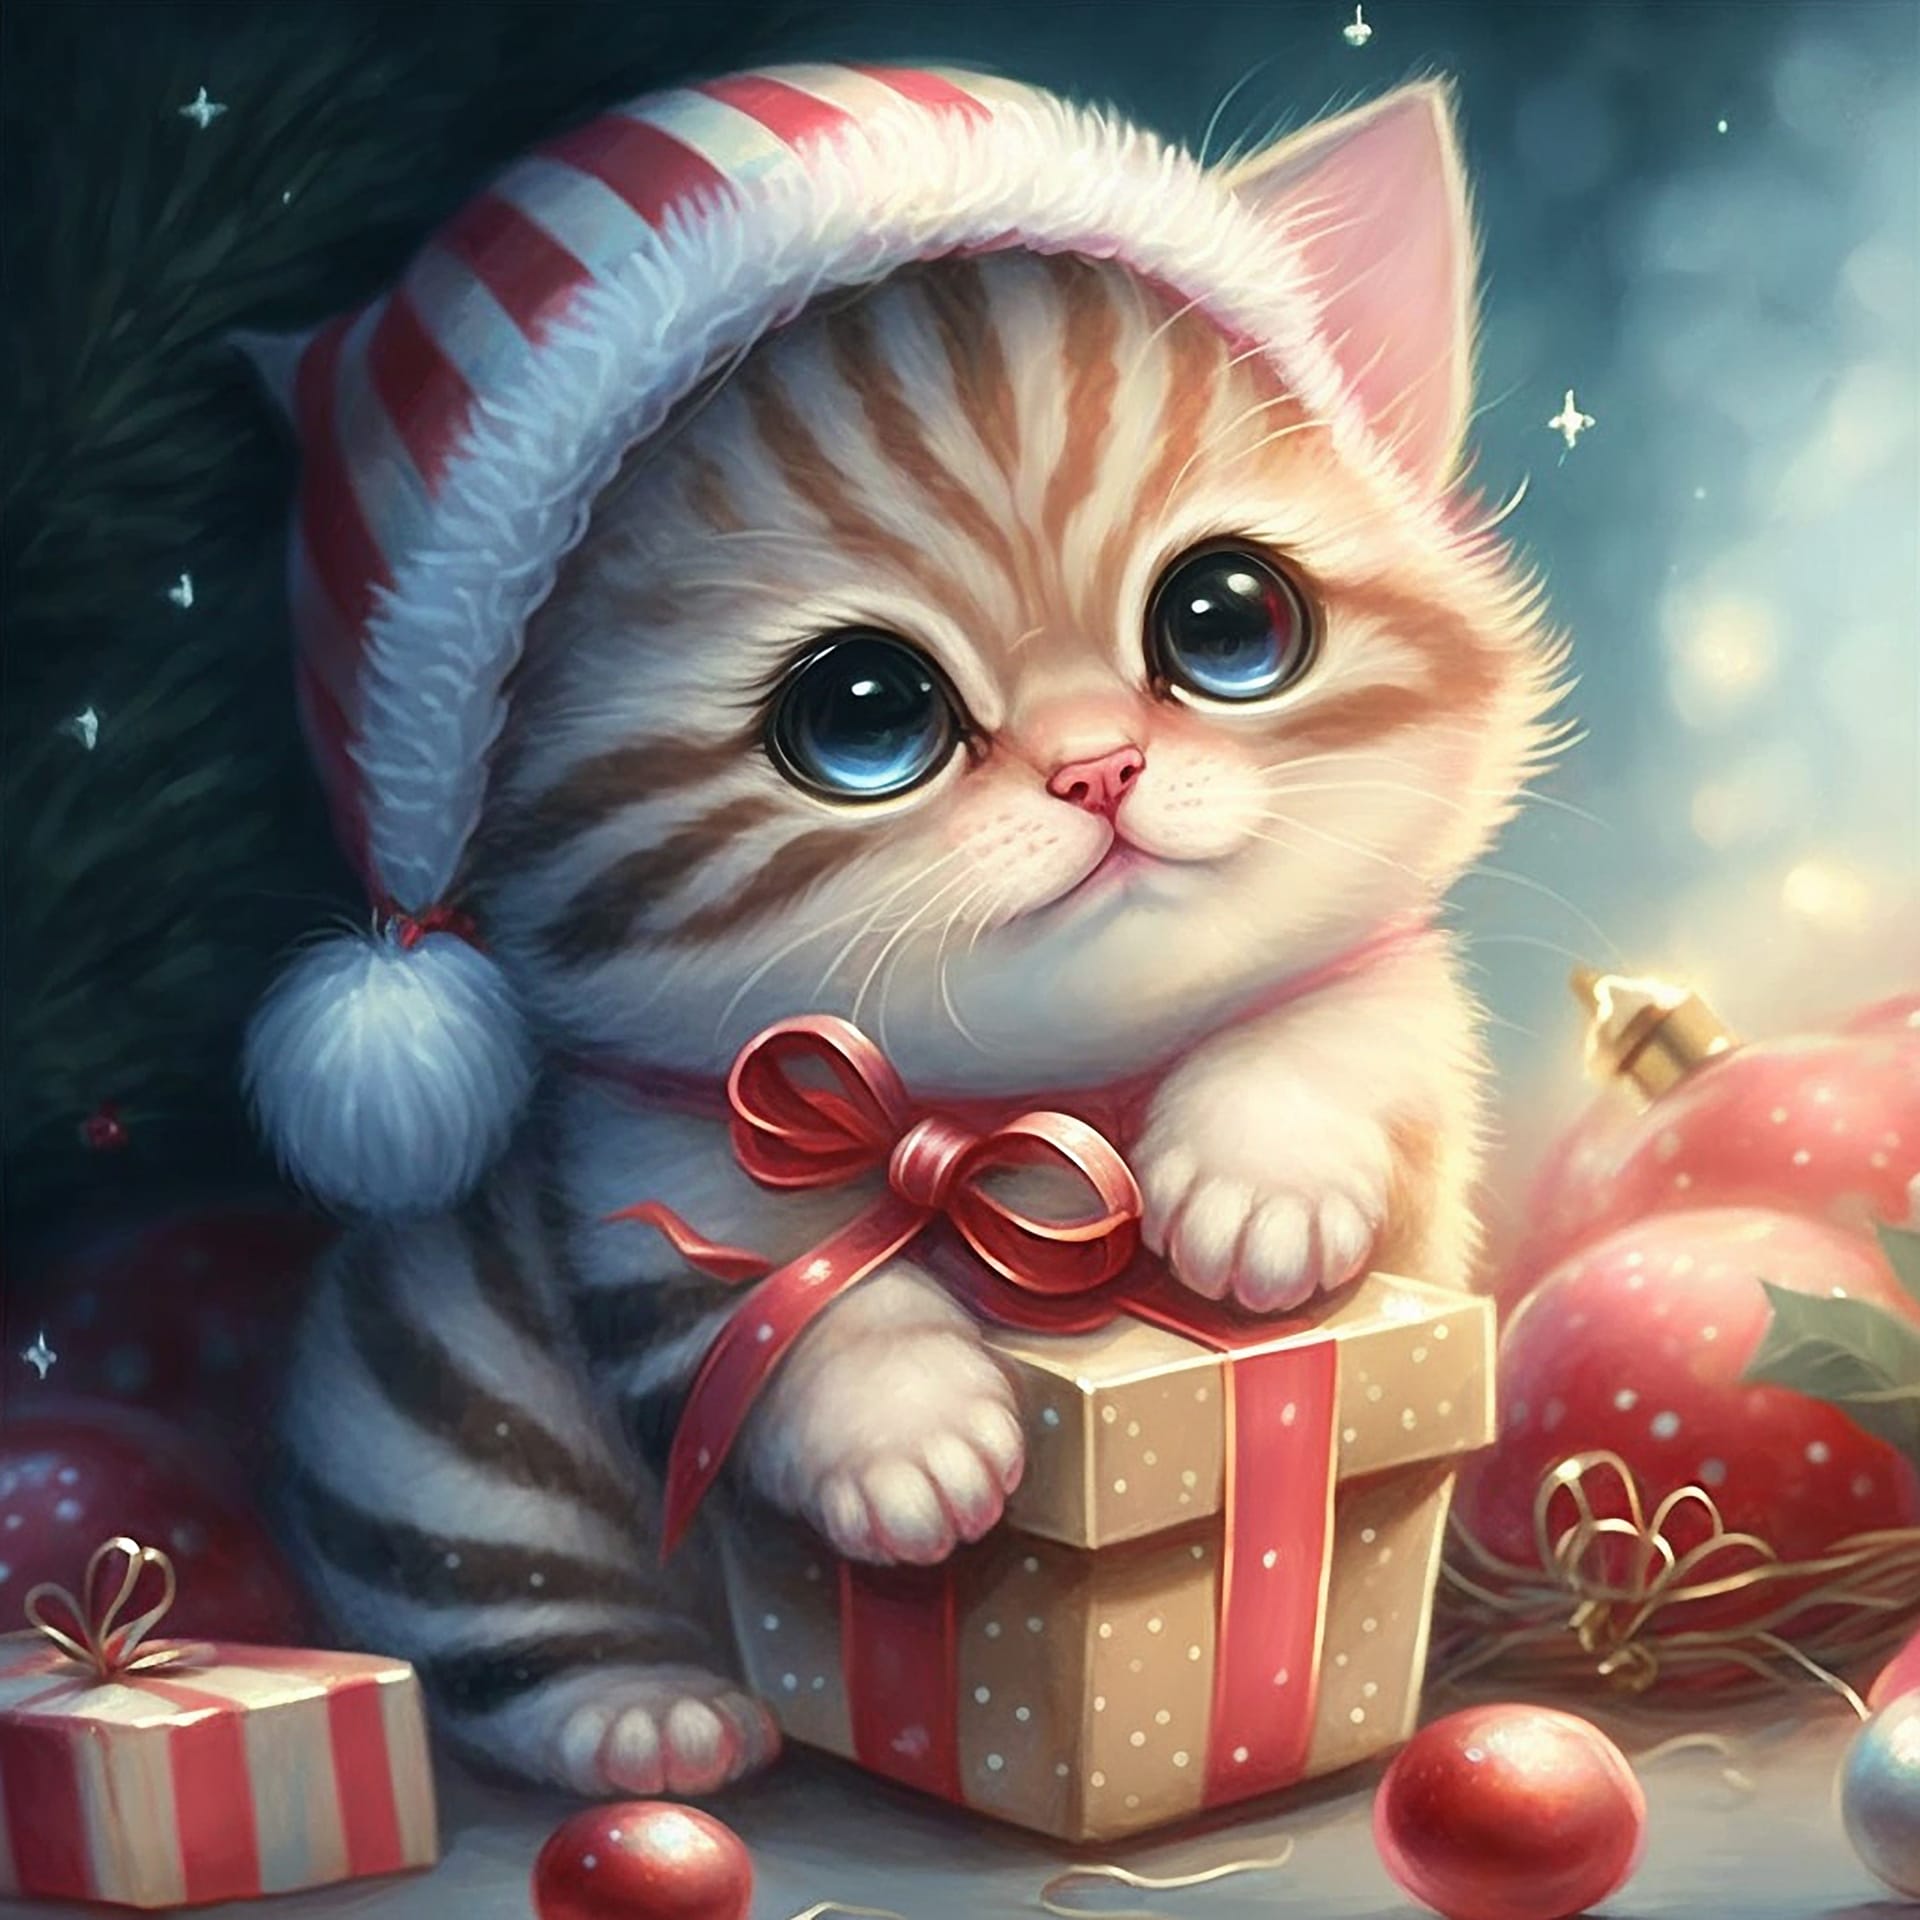 Tiny cute adorable artwork animal stuff cute cat pictures